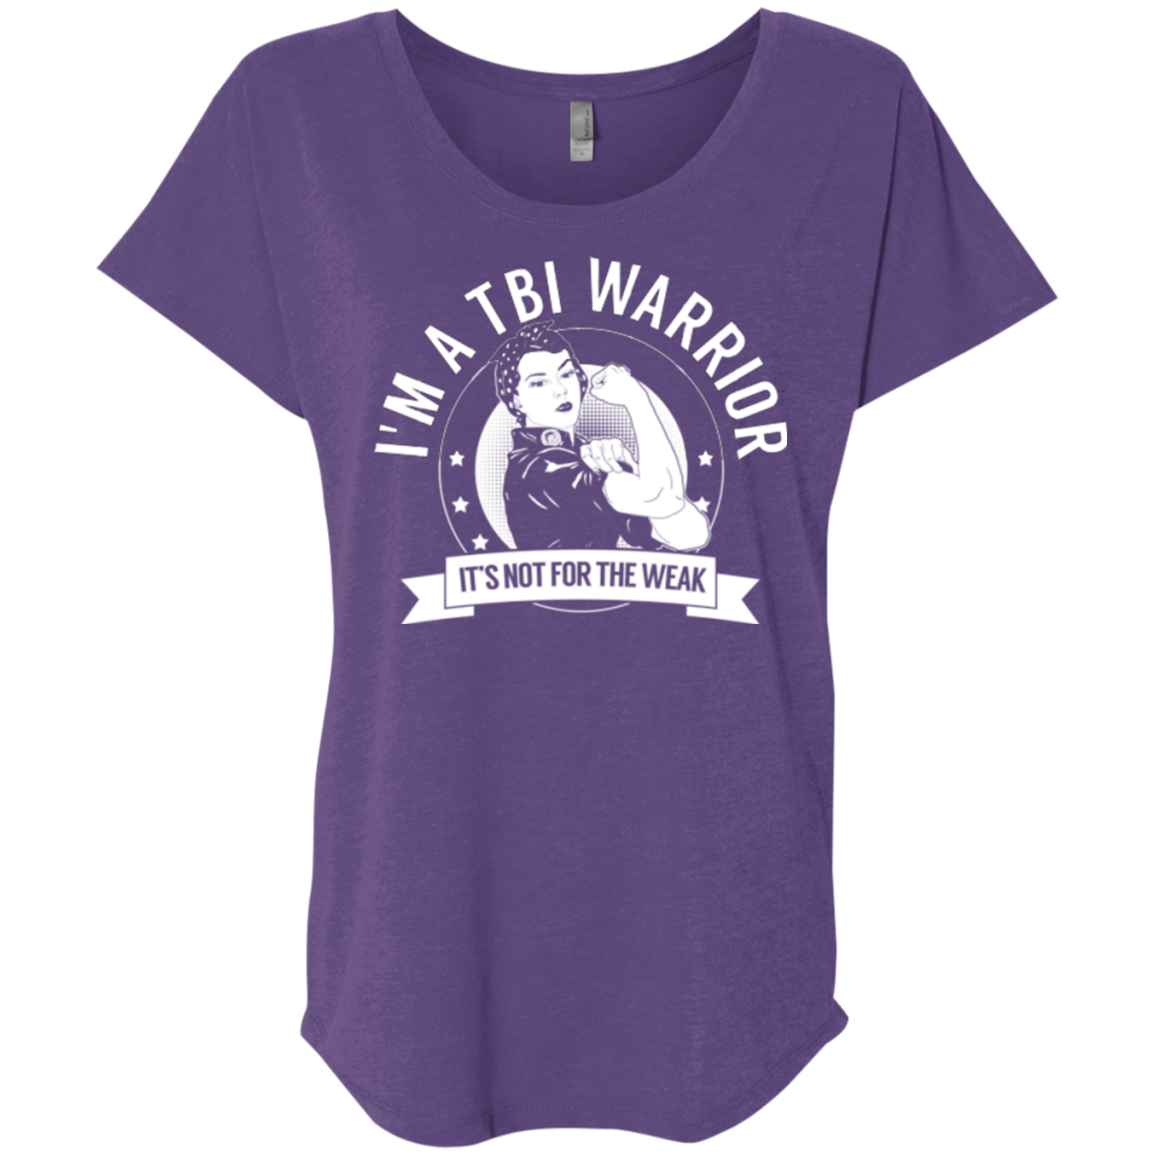 Traumatic Brain Injury - TBI Warrior Not For The Weak Dolman Sleeve - The Unchargeables